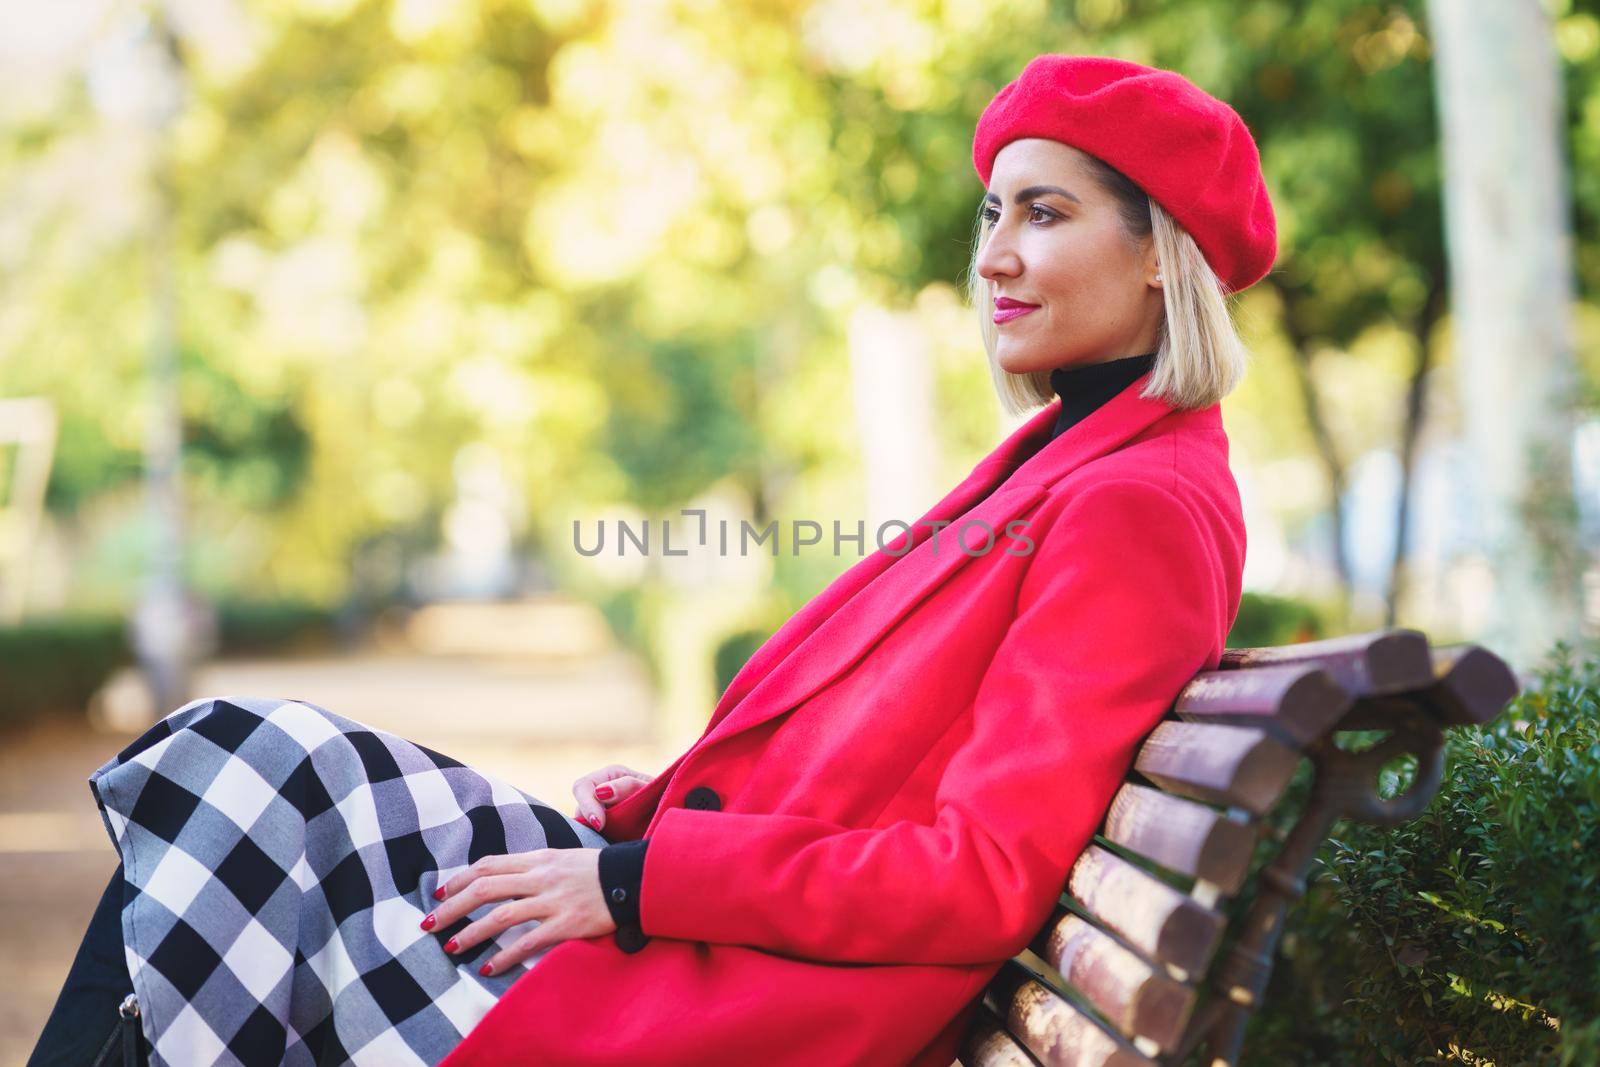 Middle-aged woman sitting on a bench in an urban park wearing red winter clothing. by javiindy